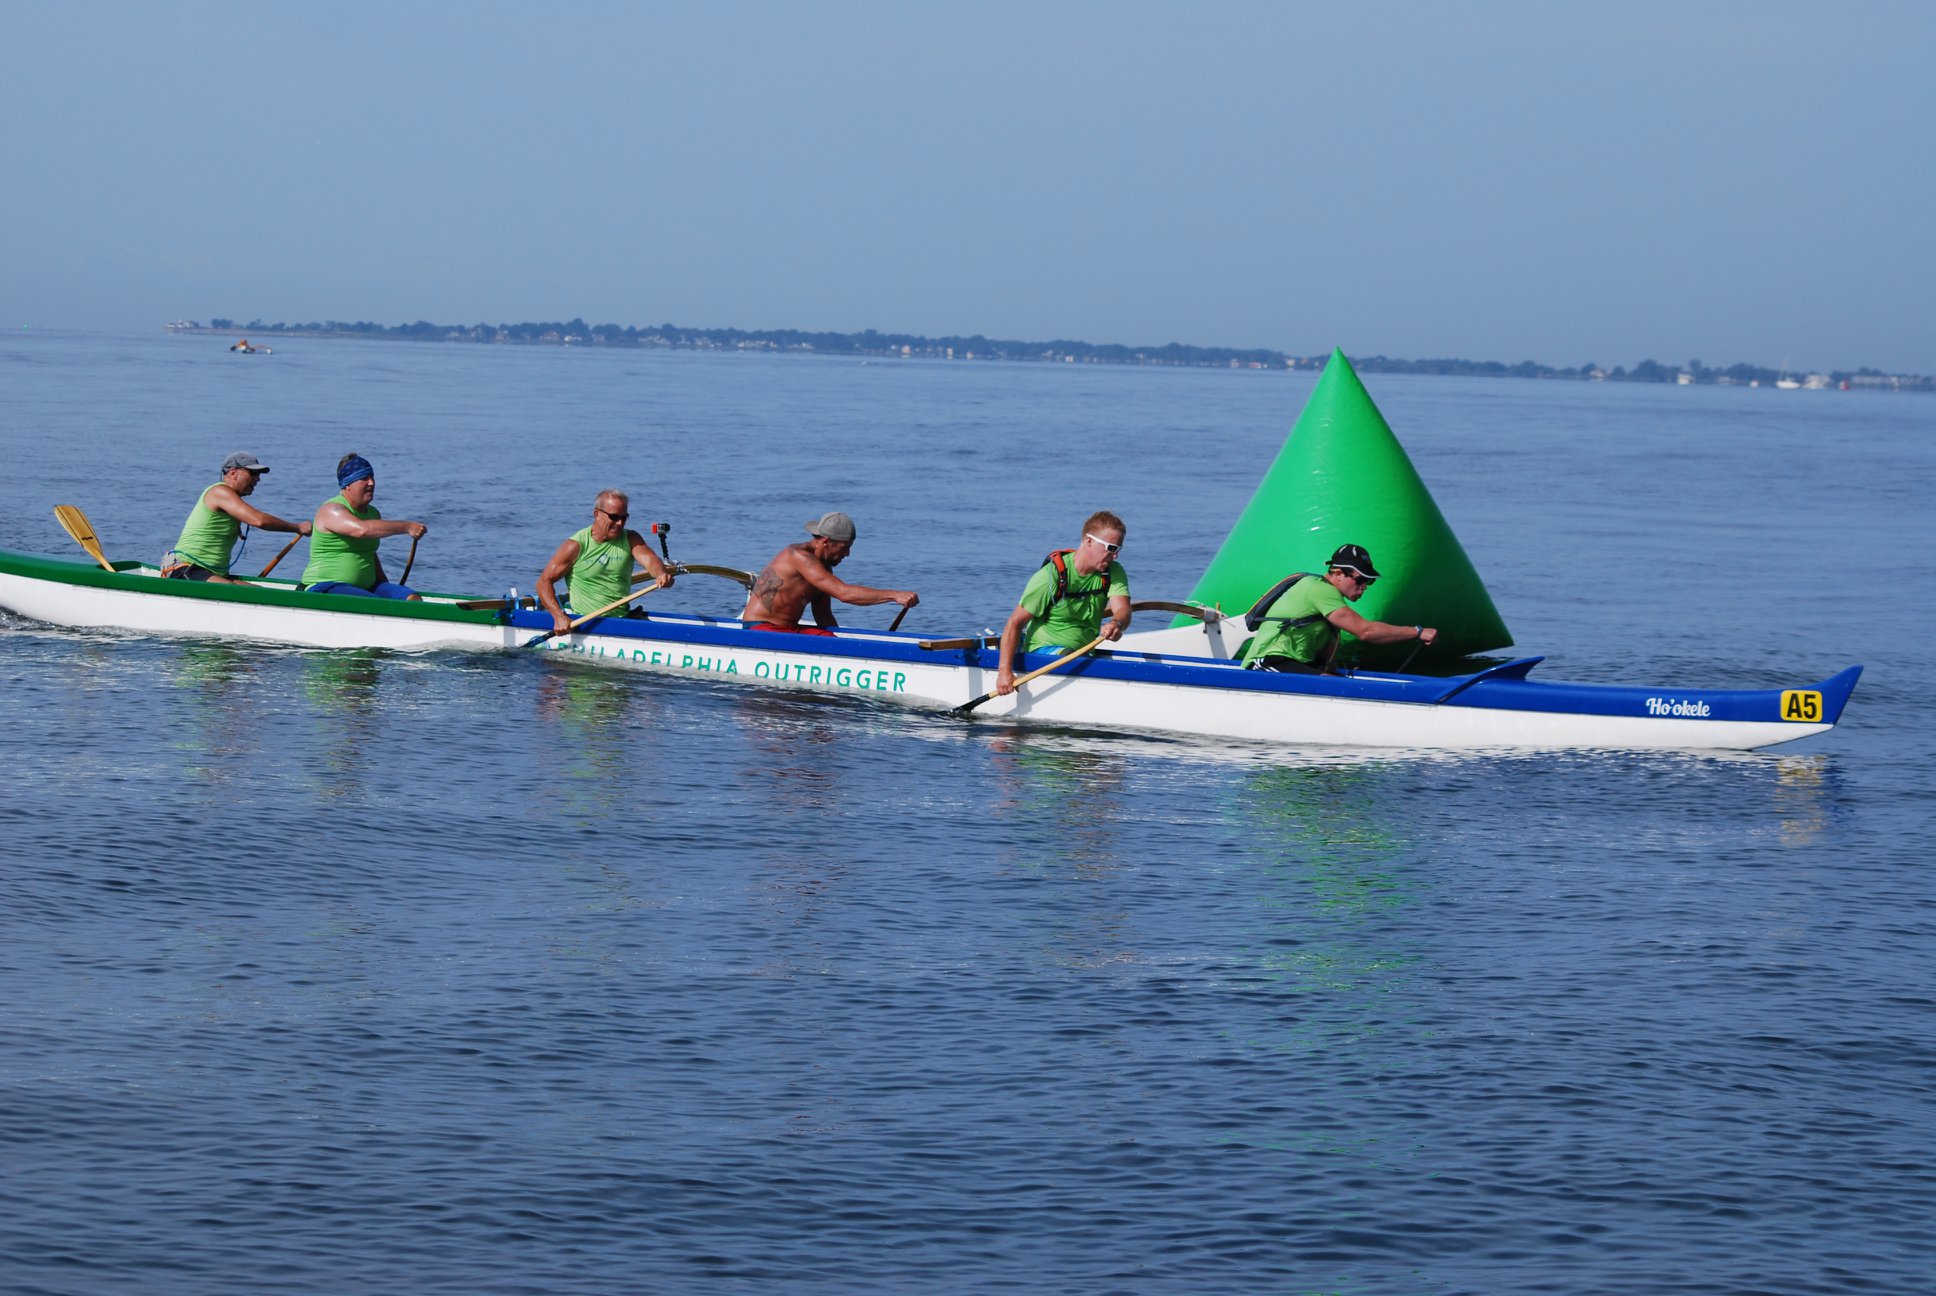 Six people in a canoe labeled "Philadelphia outrigger" turn around a large triangular green buoy